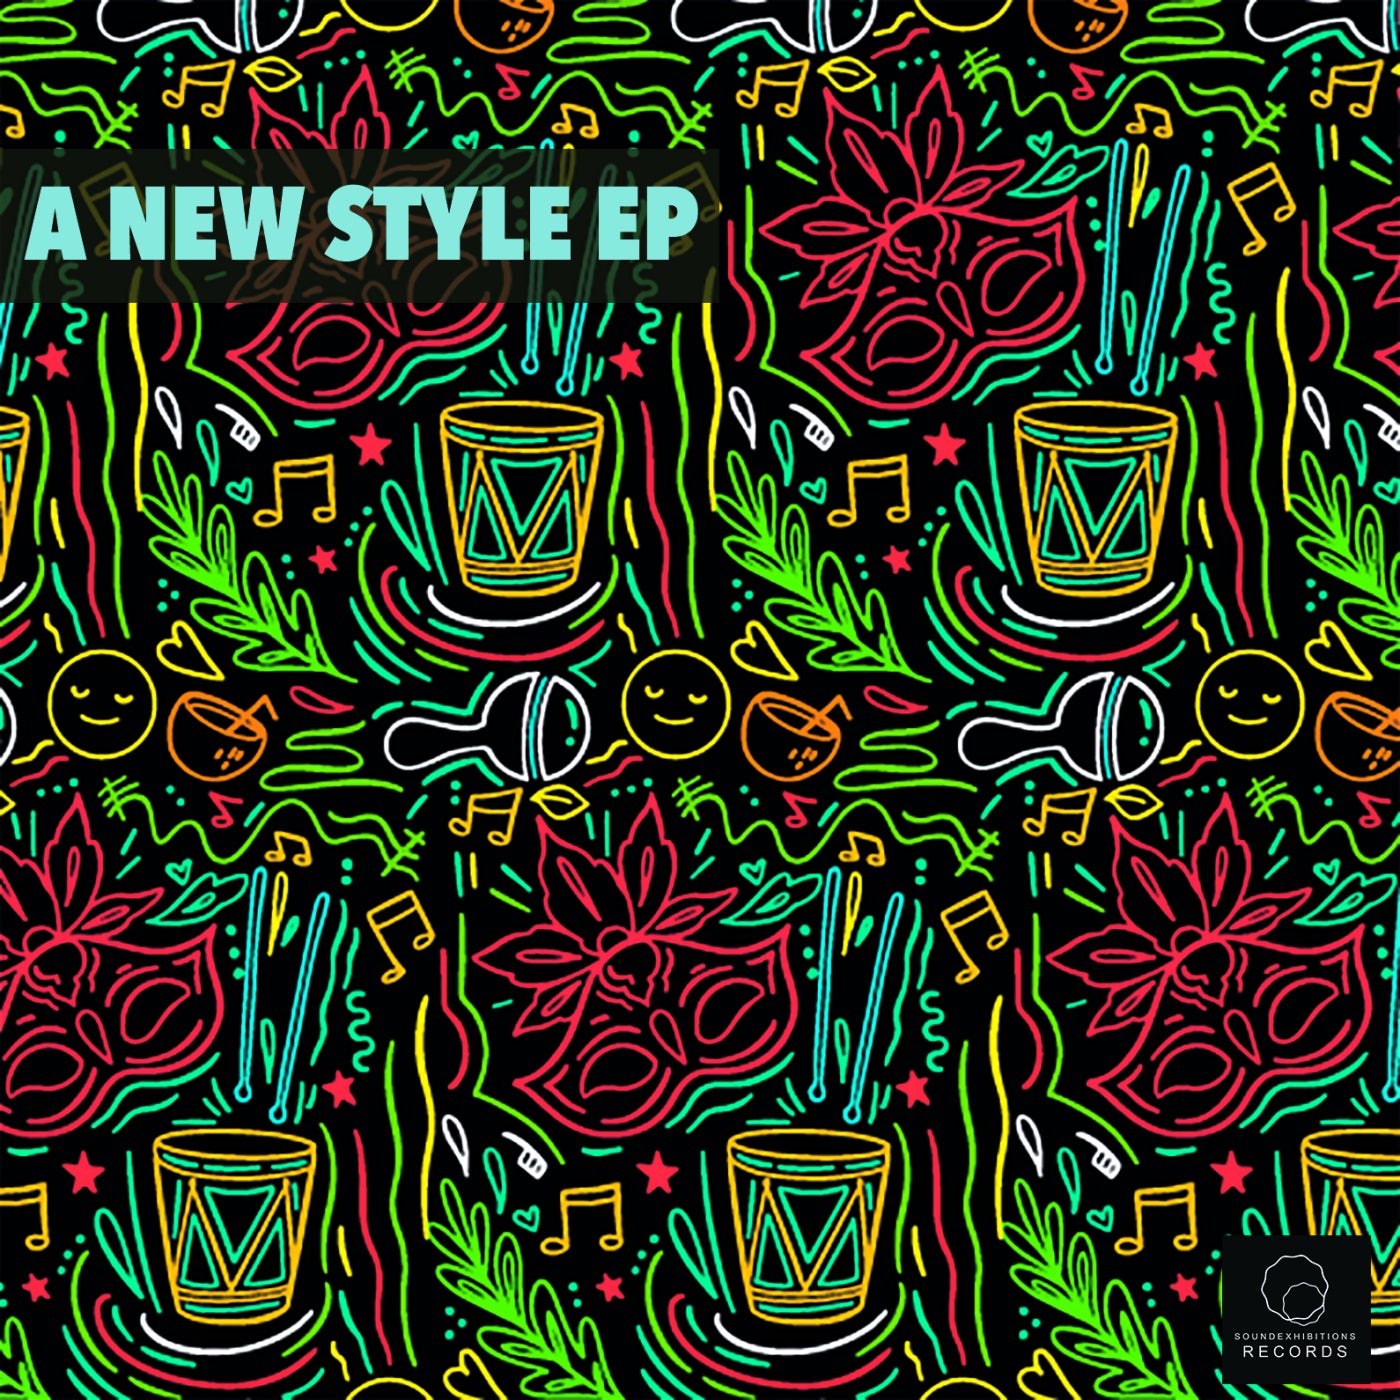 A New Style EP